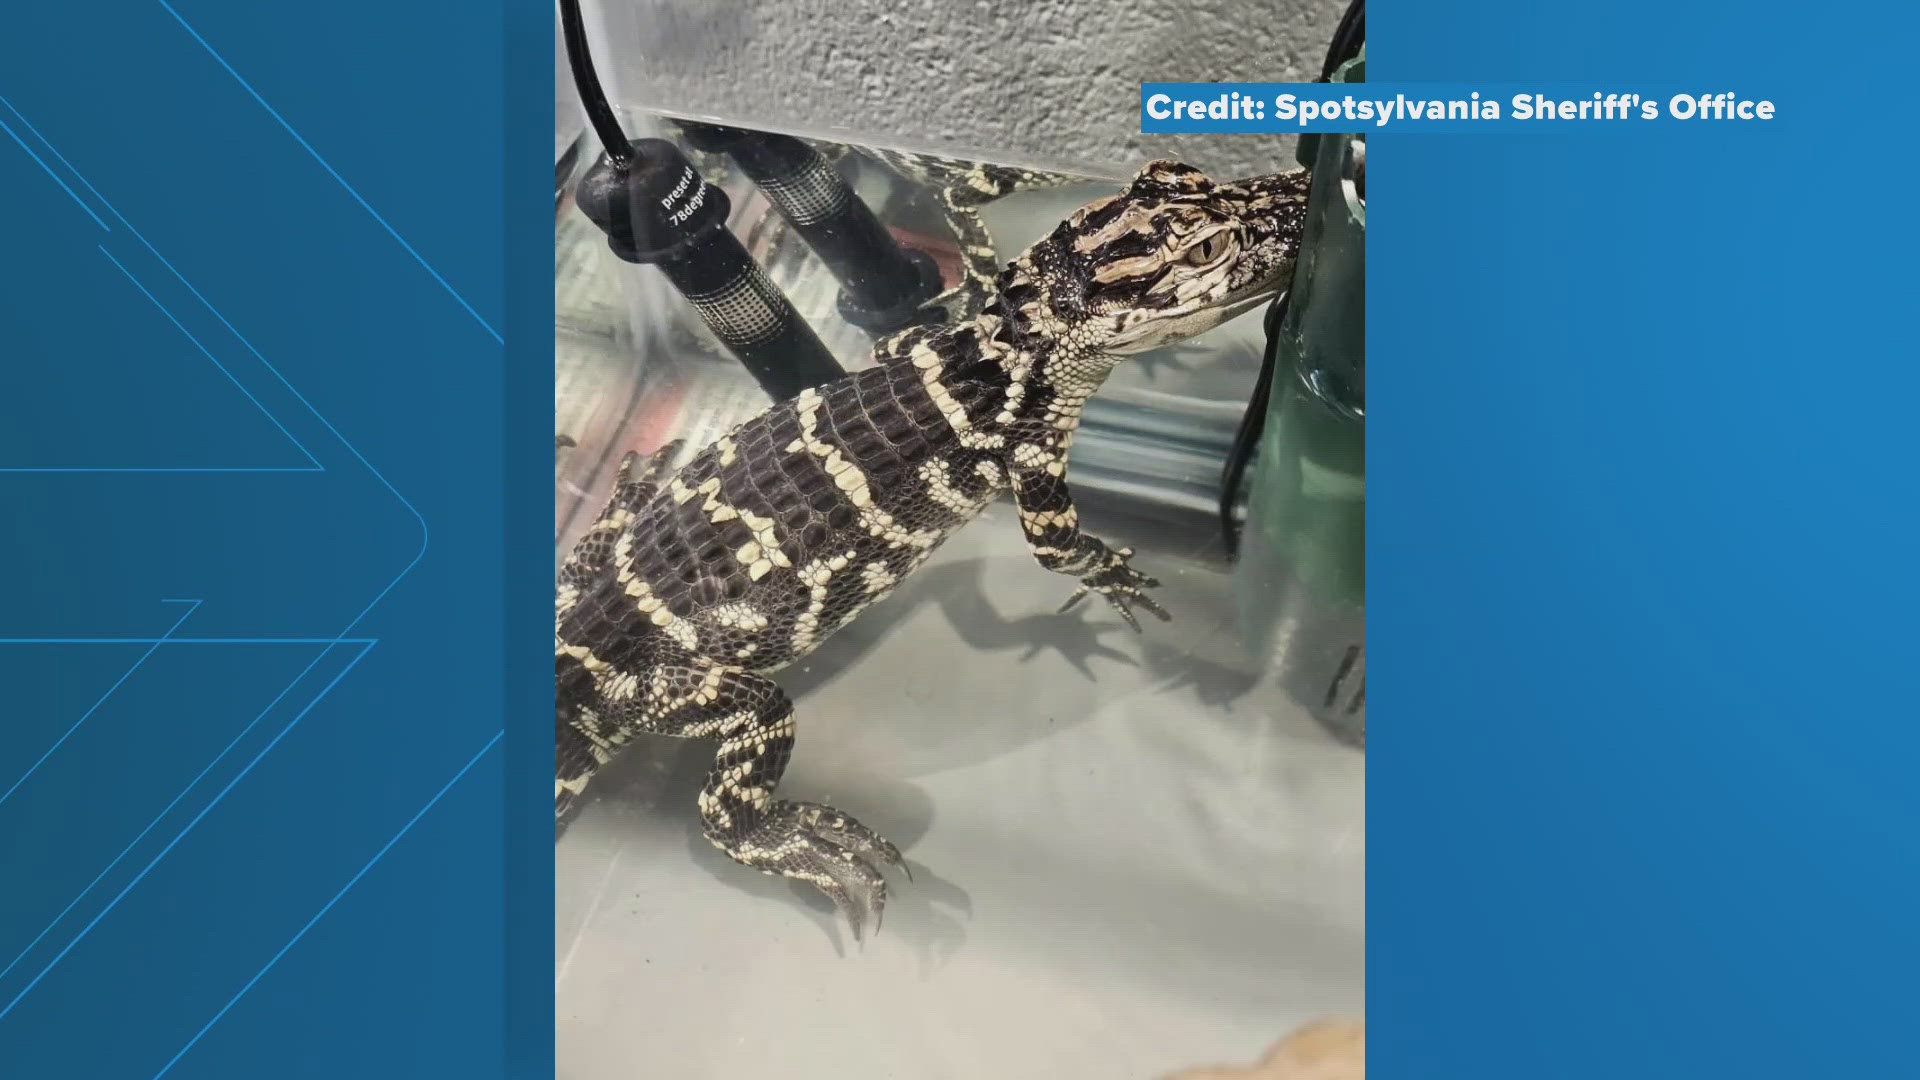 This baby alligator was taken from inside someone's home. It will come as no surprise to learn that alligators are not native to Virginia.